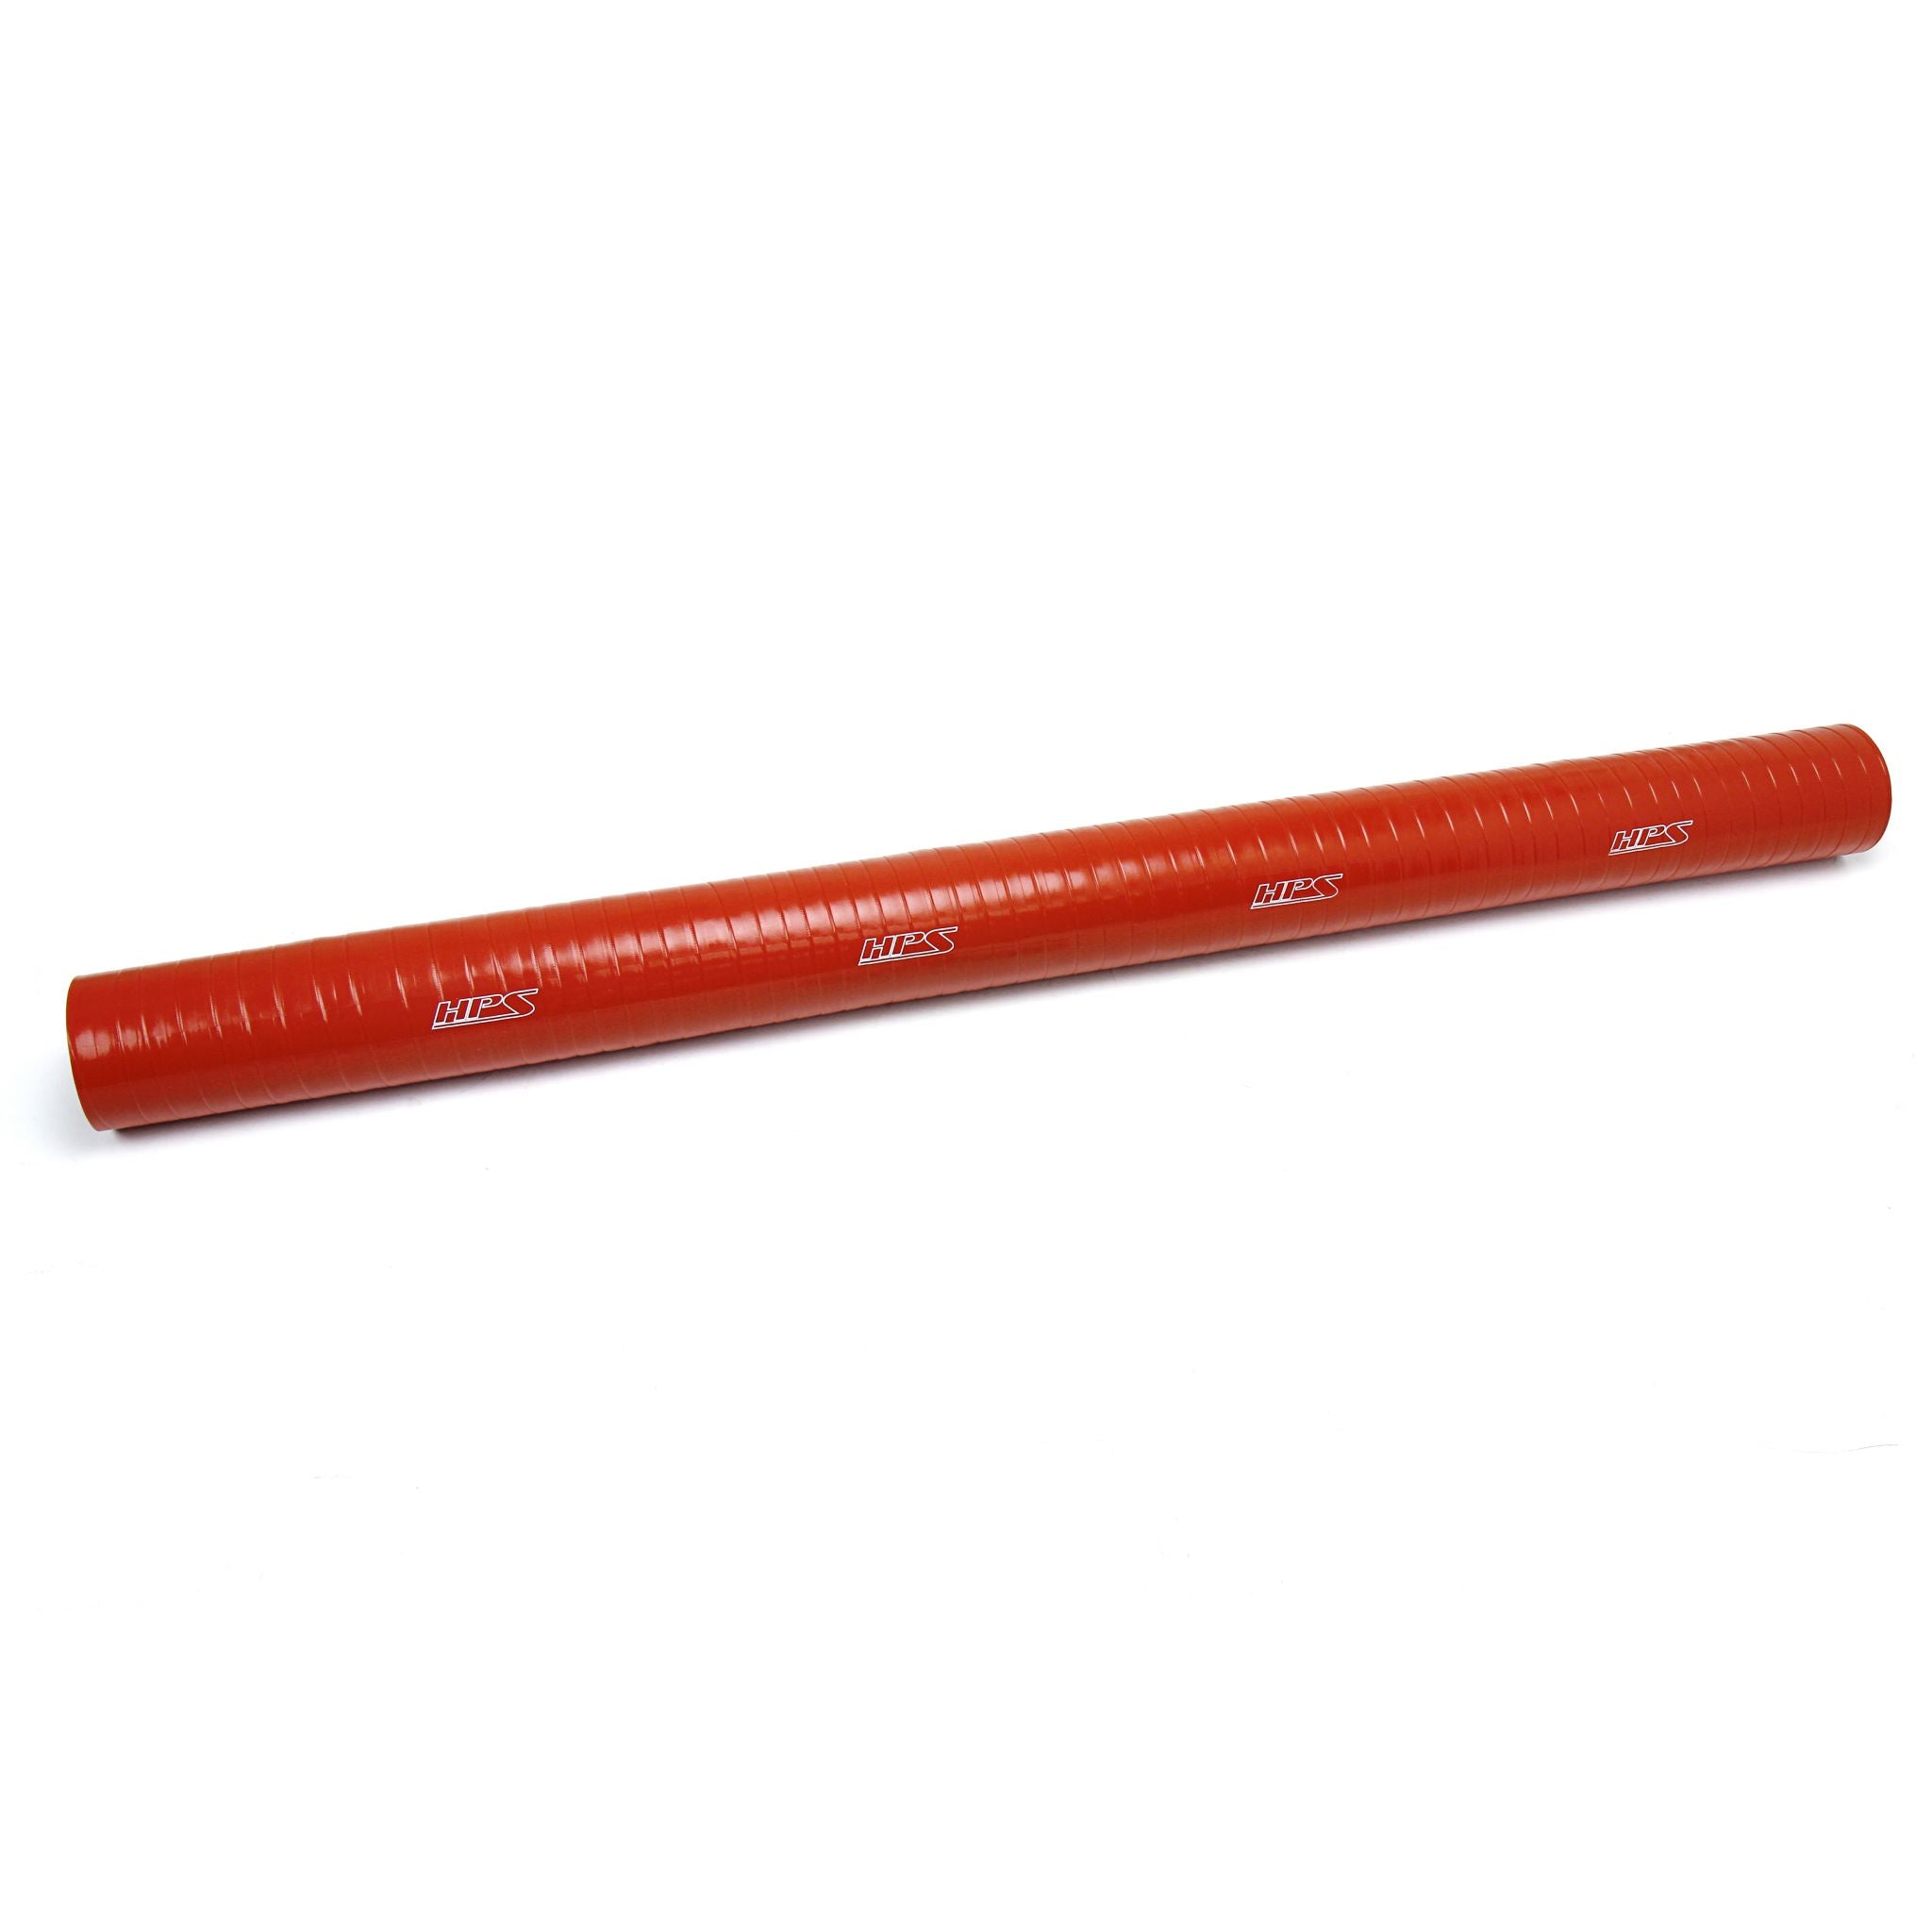 HPS Performance Silicone Coolant TubeUltra High Temp 4-ply Reinforced7/8" ID3 Feet Long